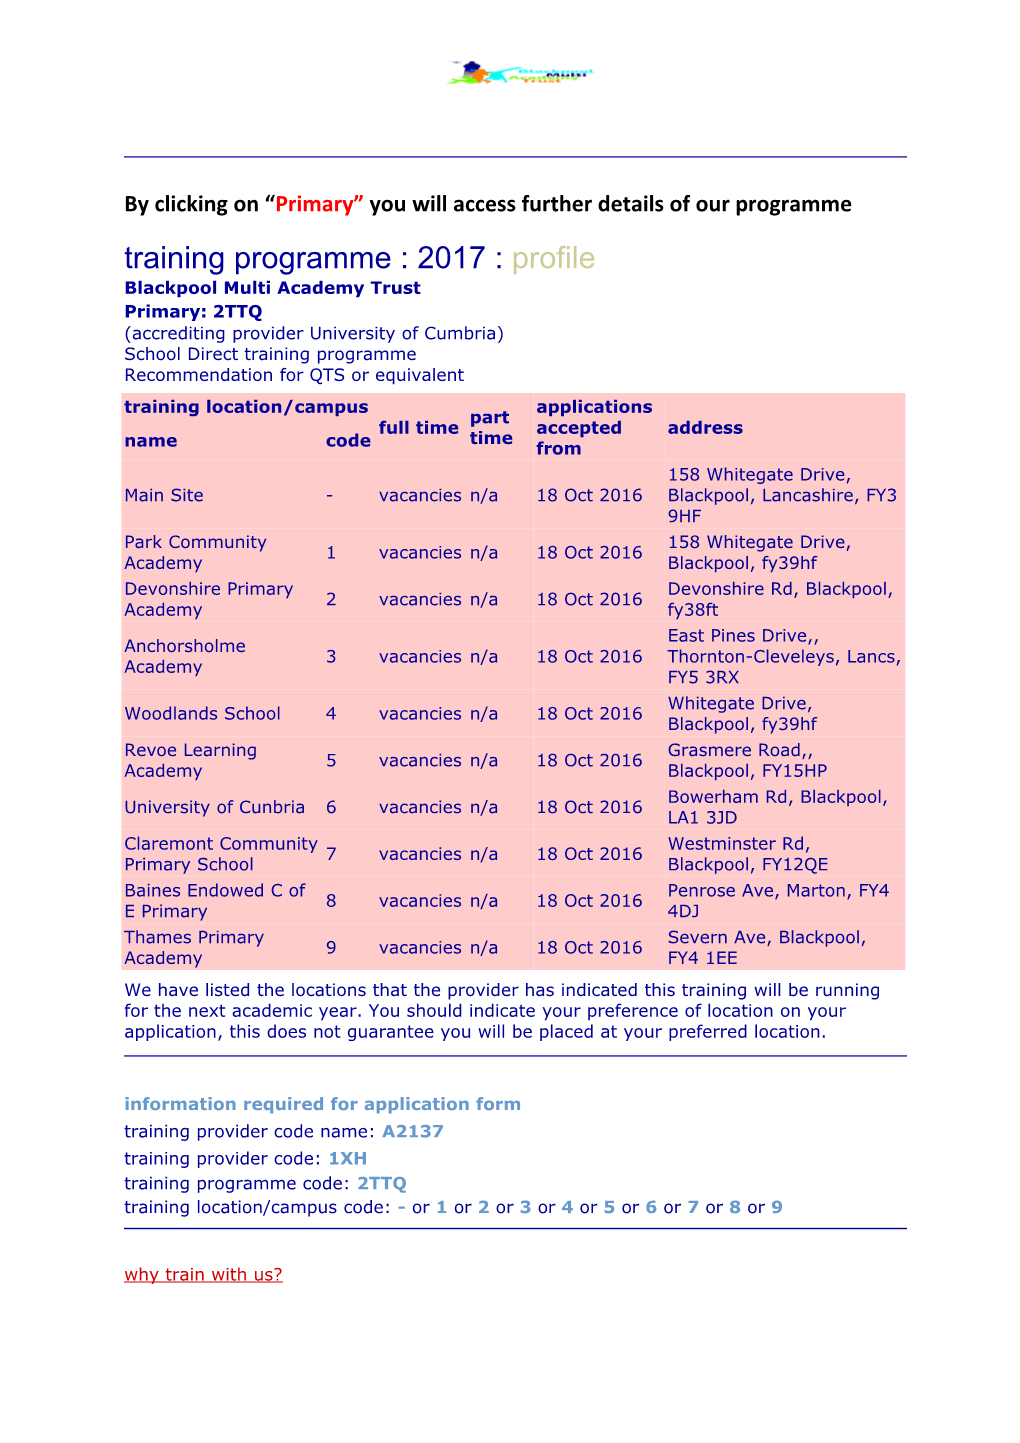 Please Click Find Training Programmes Starting in 2017